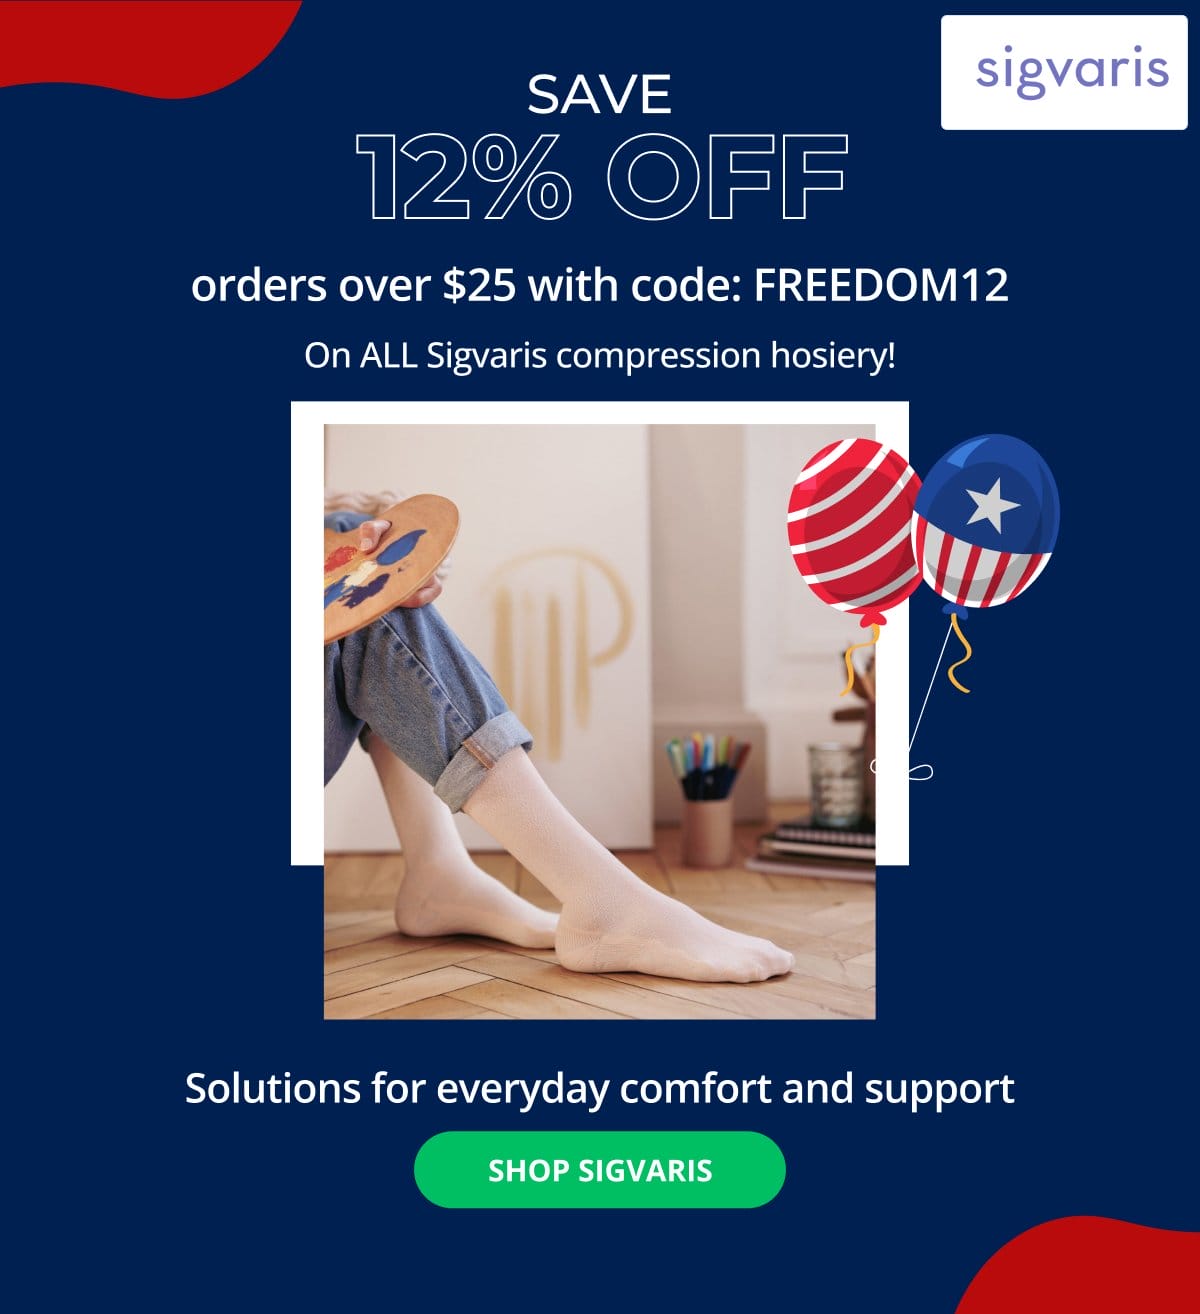 Sigvaris – SAVE 12% OFF orders over \\$25 with code: FREEDOM12 On ALL Sigvaris compression hosiery! Solutions for everyday comfort and support → SHOP SIGVARIS